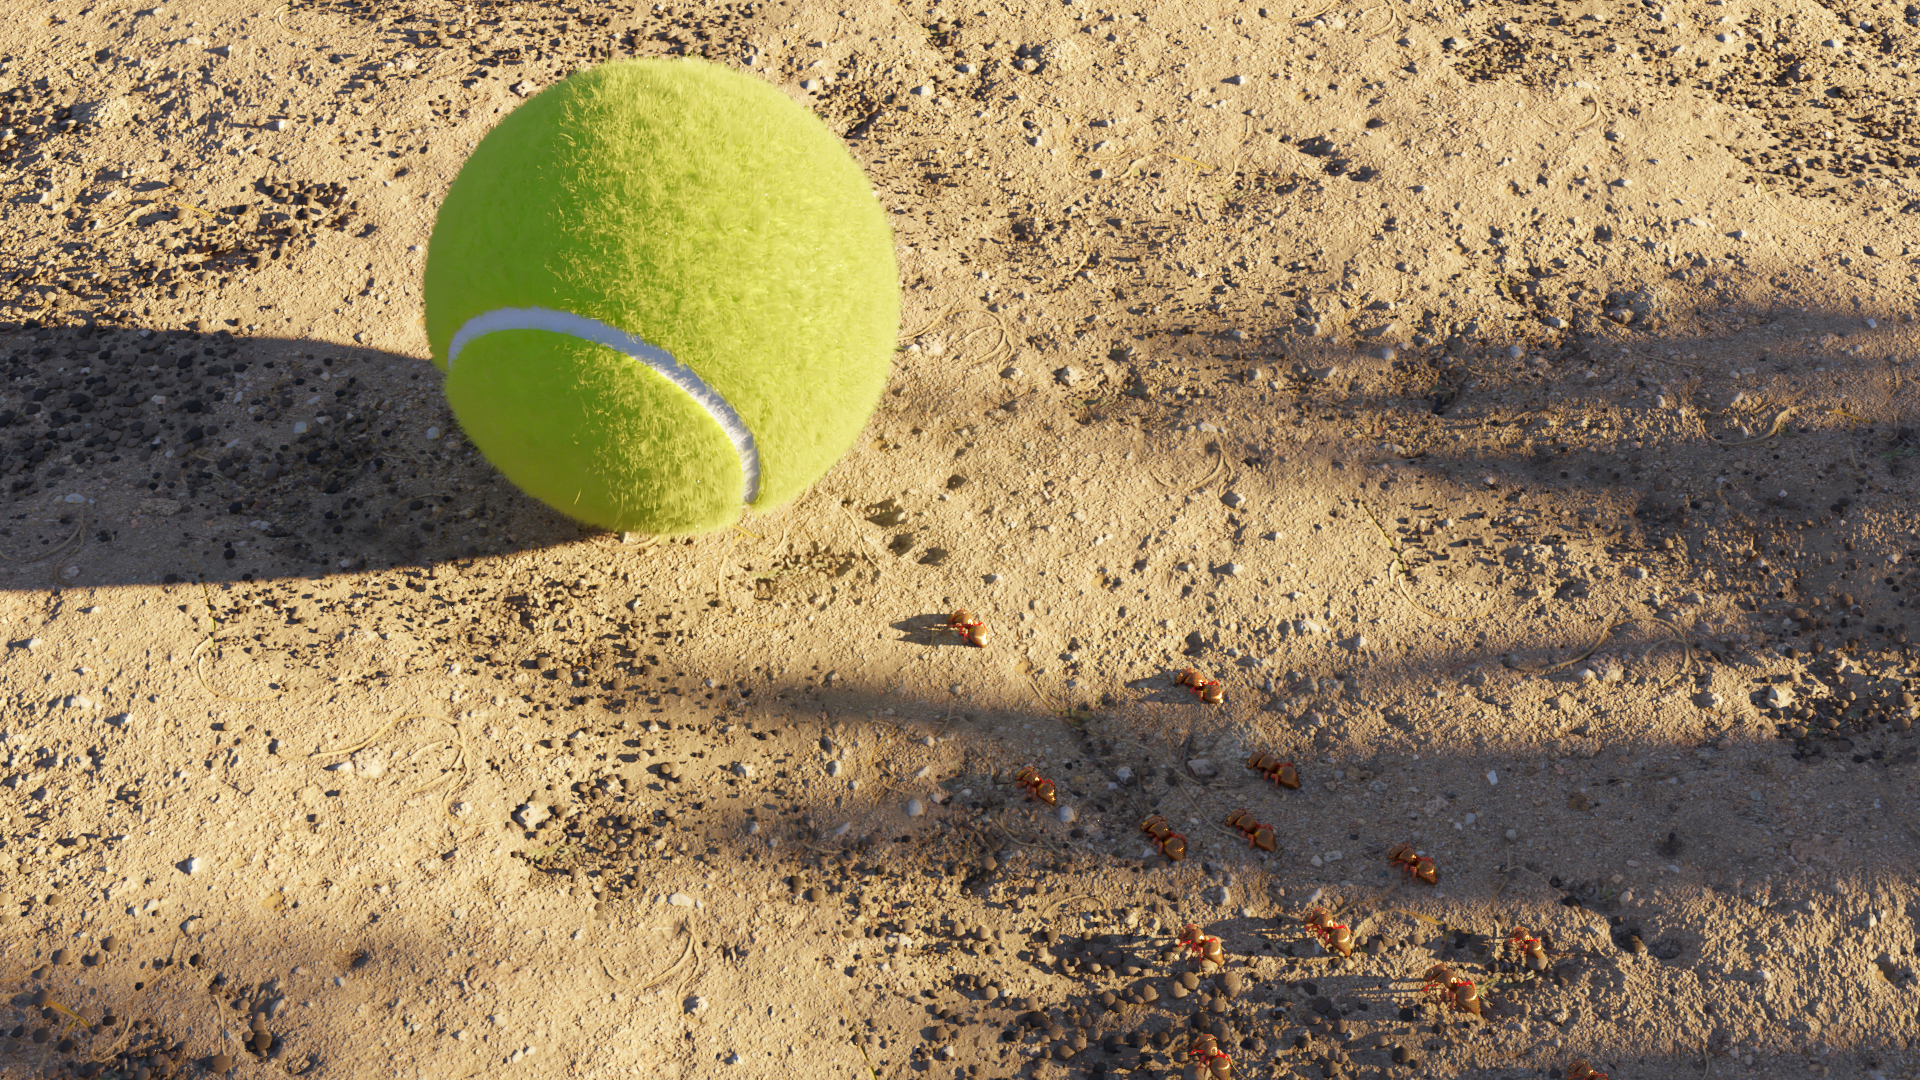 Tennis ball with ants : r/blender